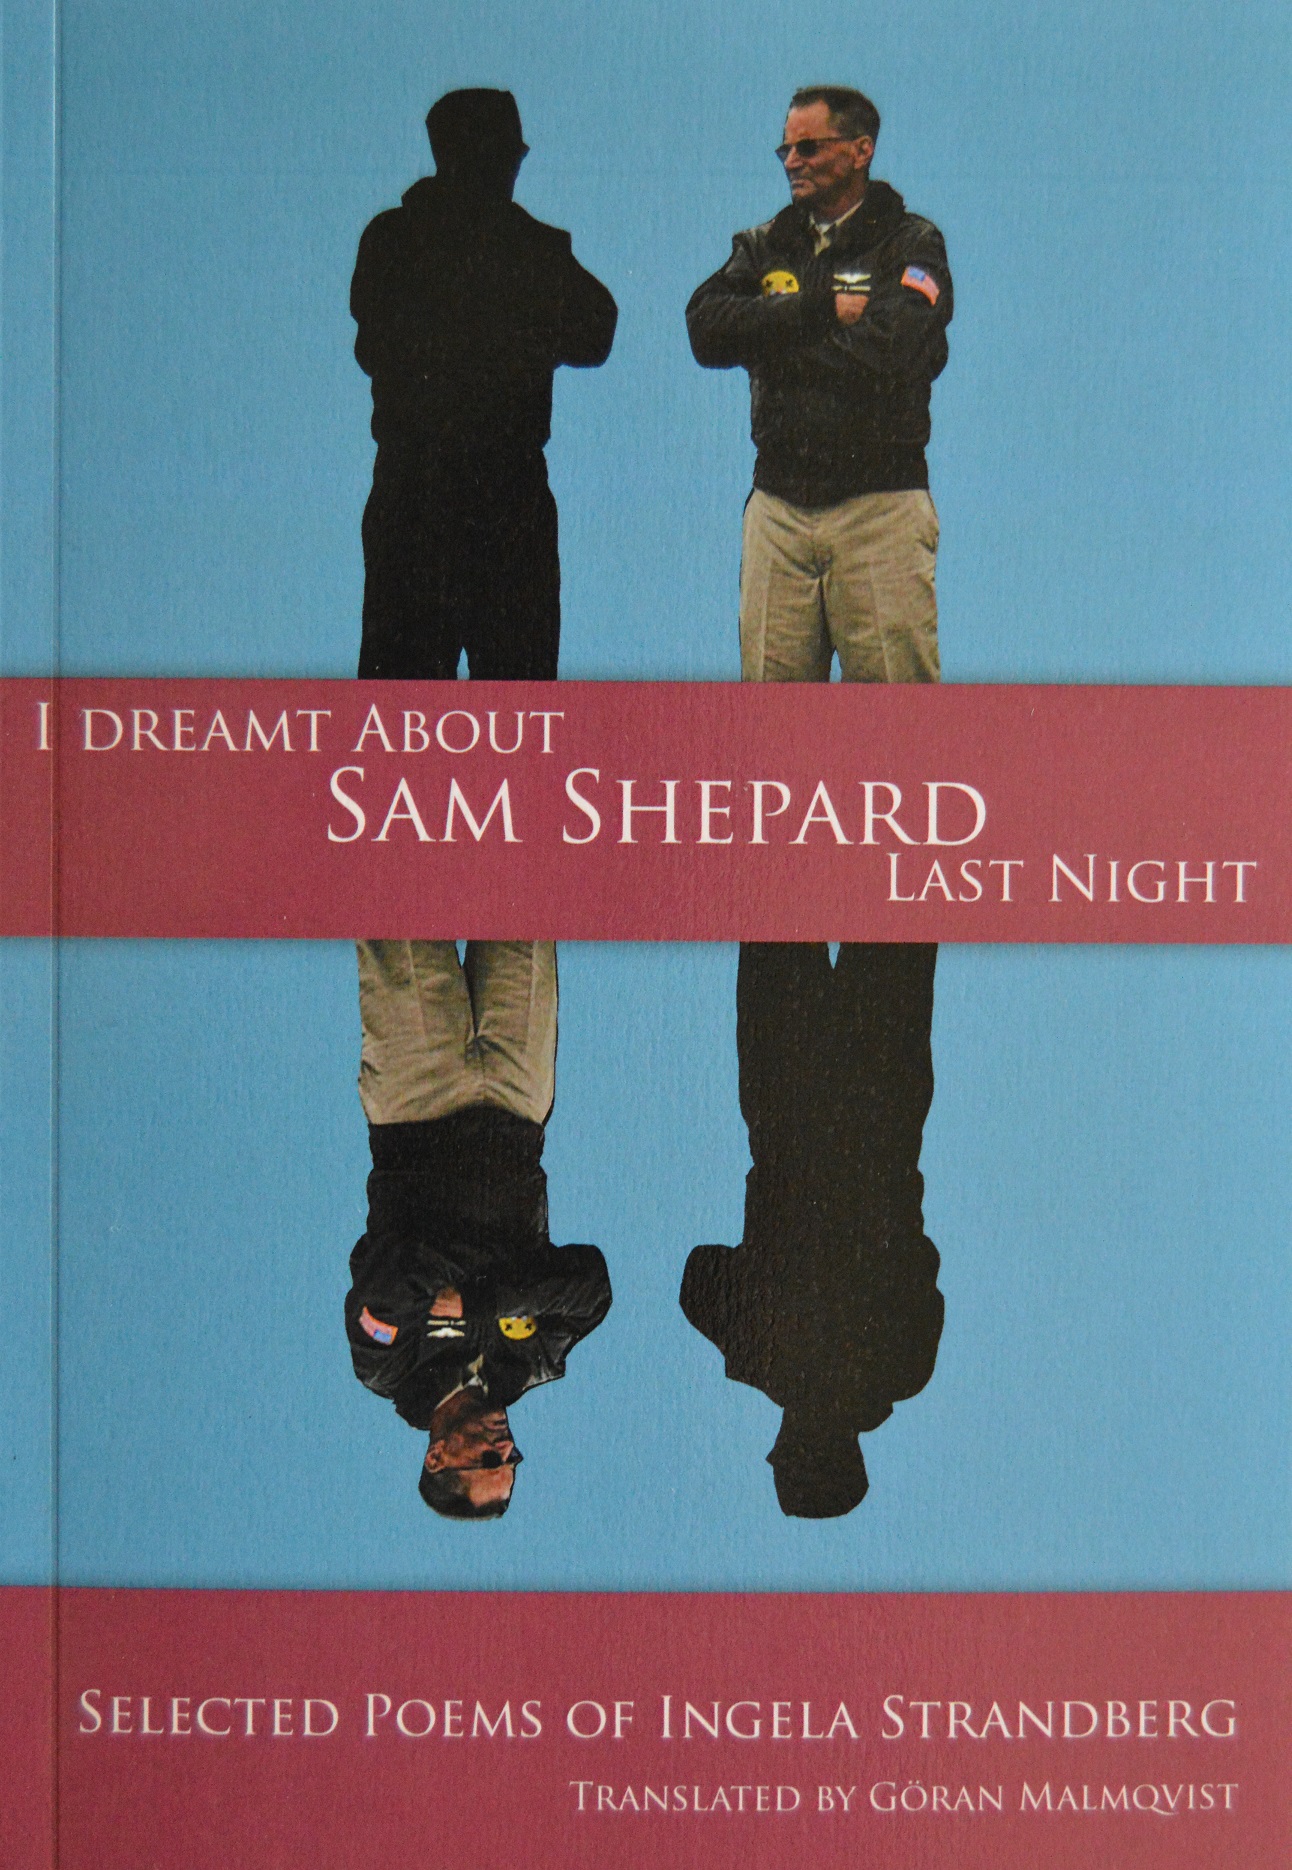 I dreamt about Sam Shepard last night